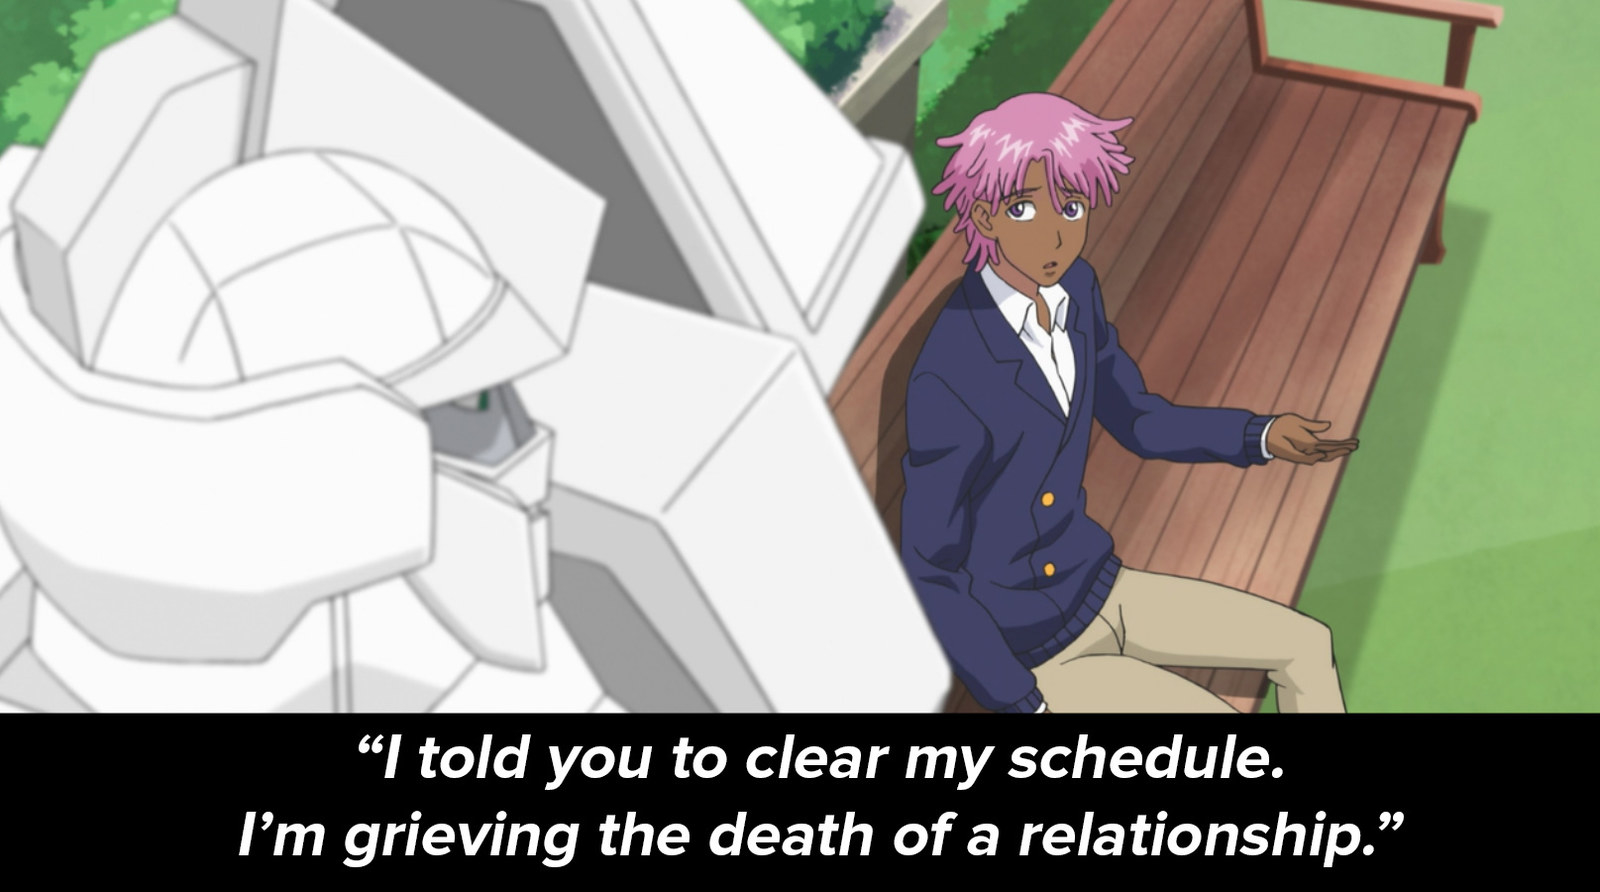 Neo Yokio Returning With A Pink Christmas Special